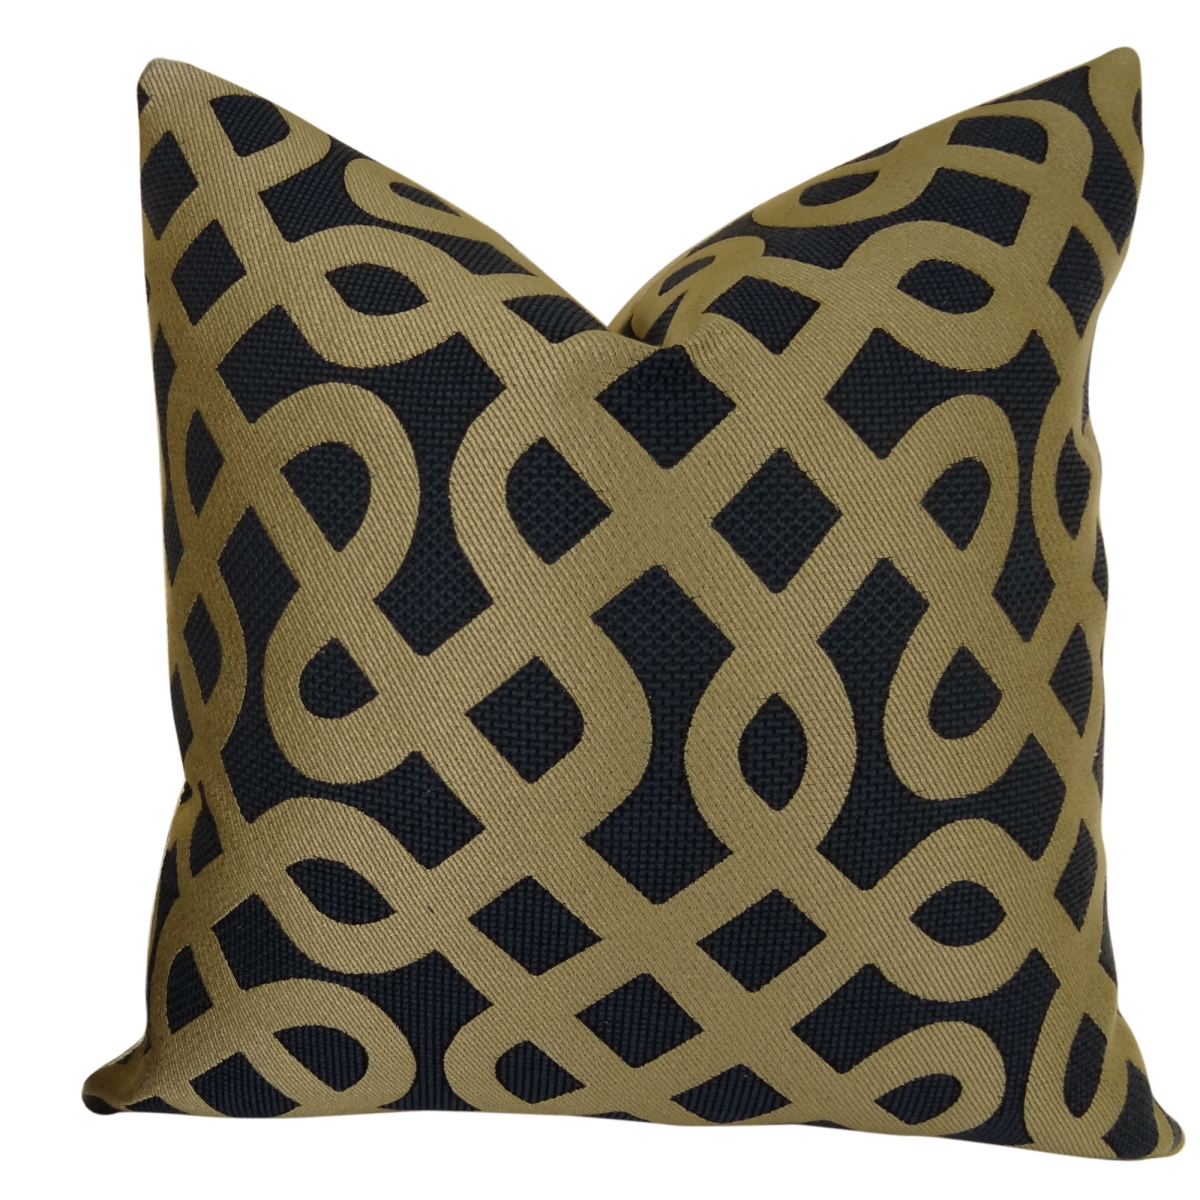 DwellingDesigns Graphic Maze Handmade Throw Pillow - Navy & Taupe - 20 x 30 in. Double Sided Queen Size